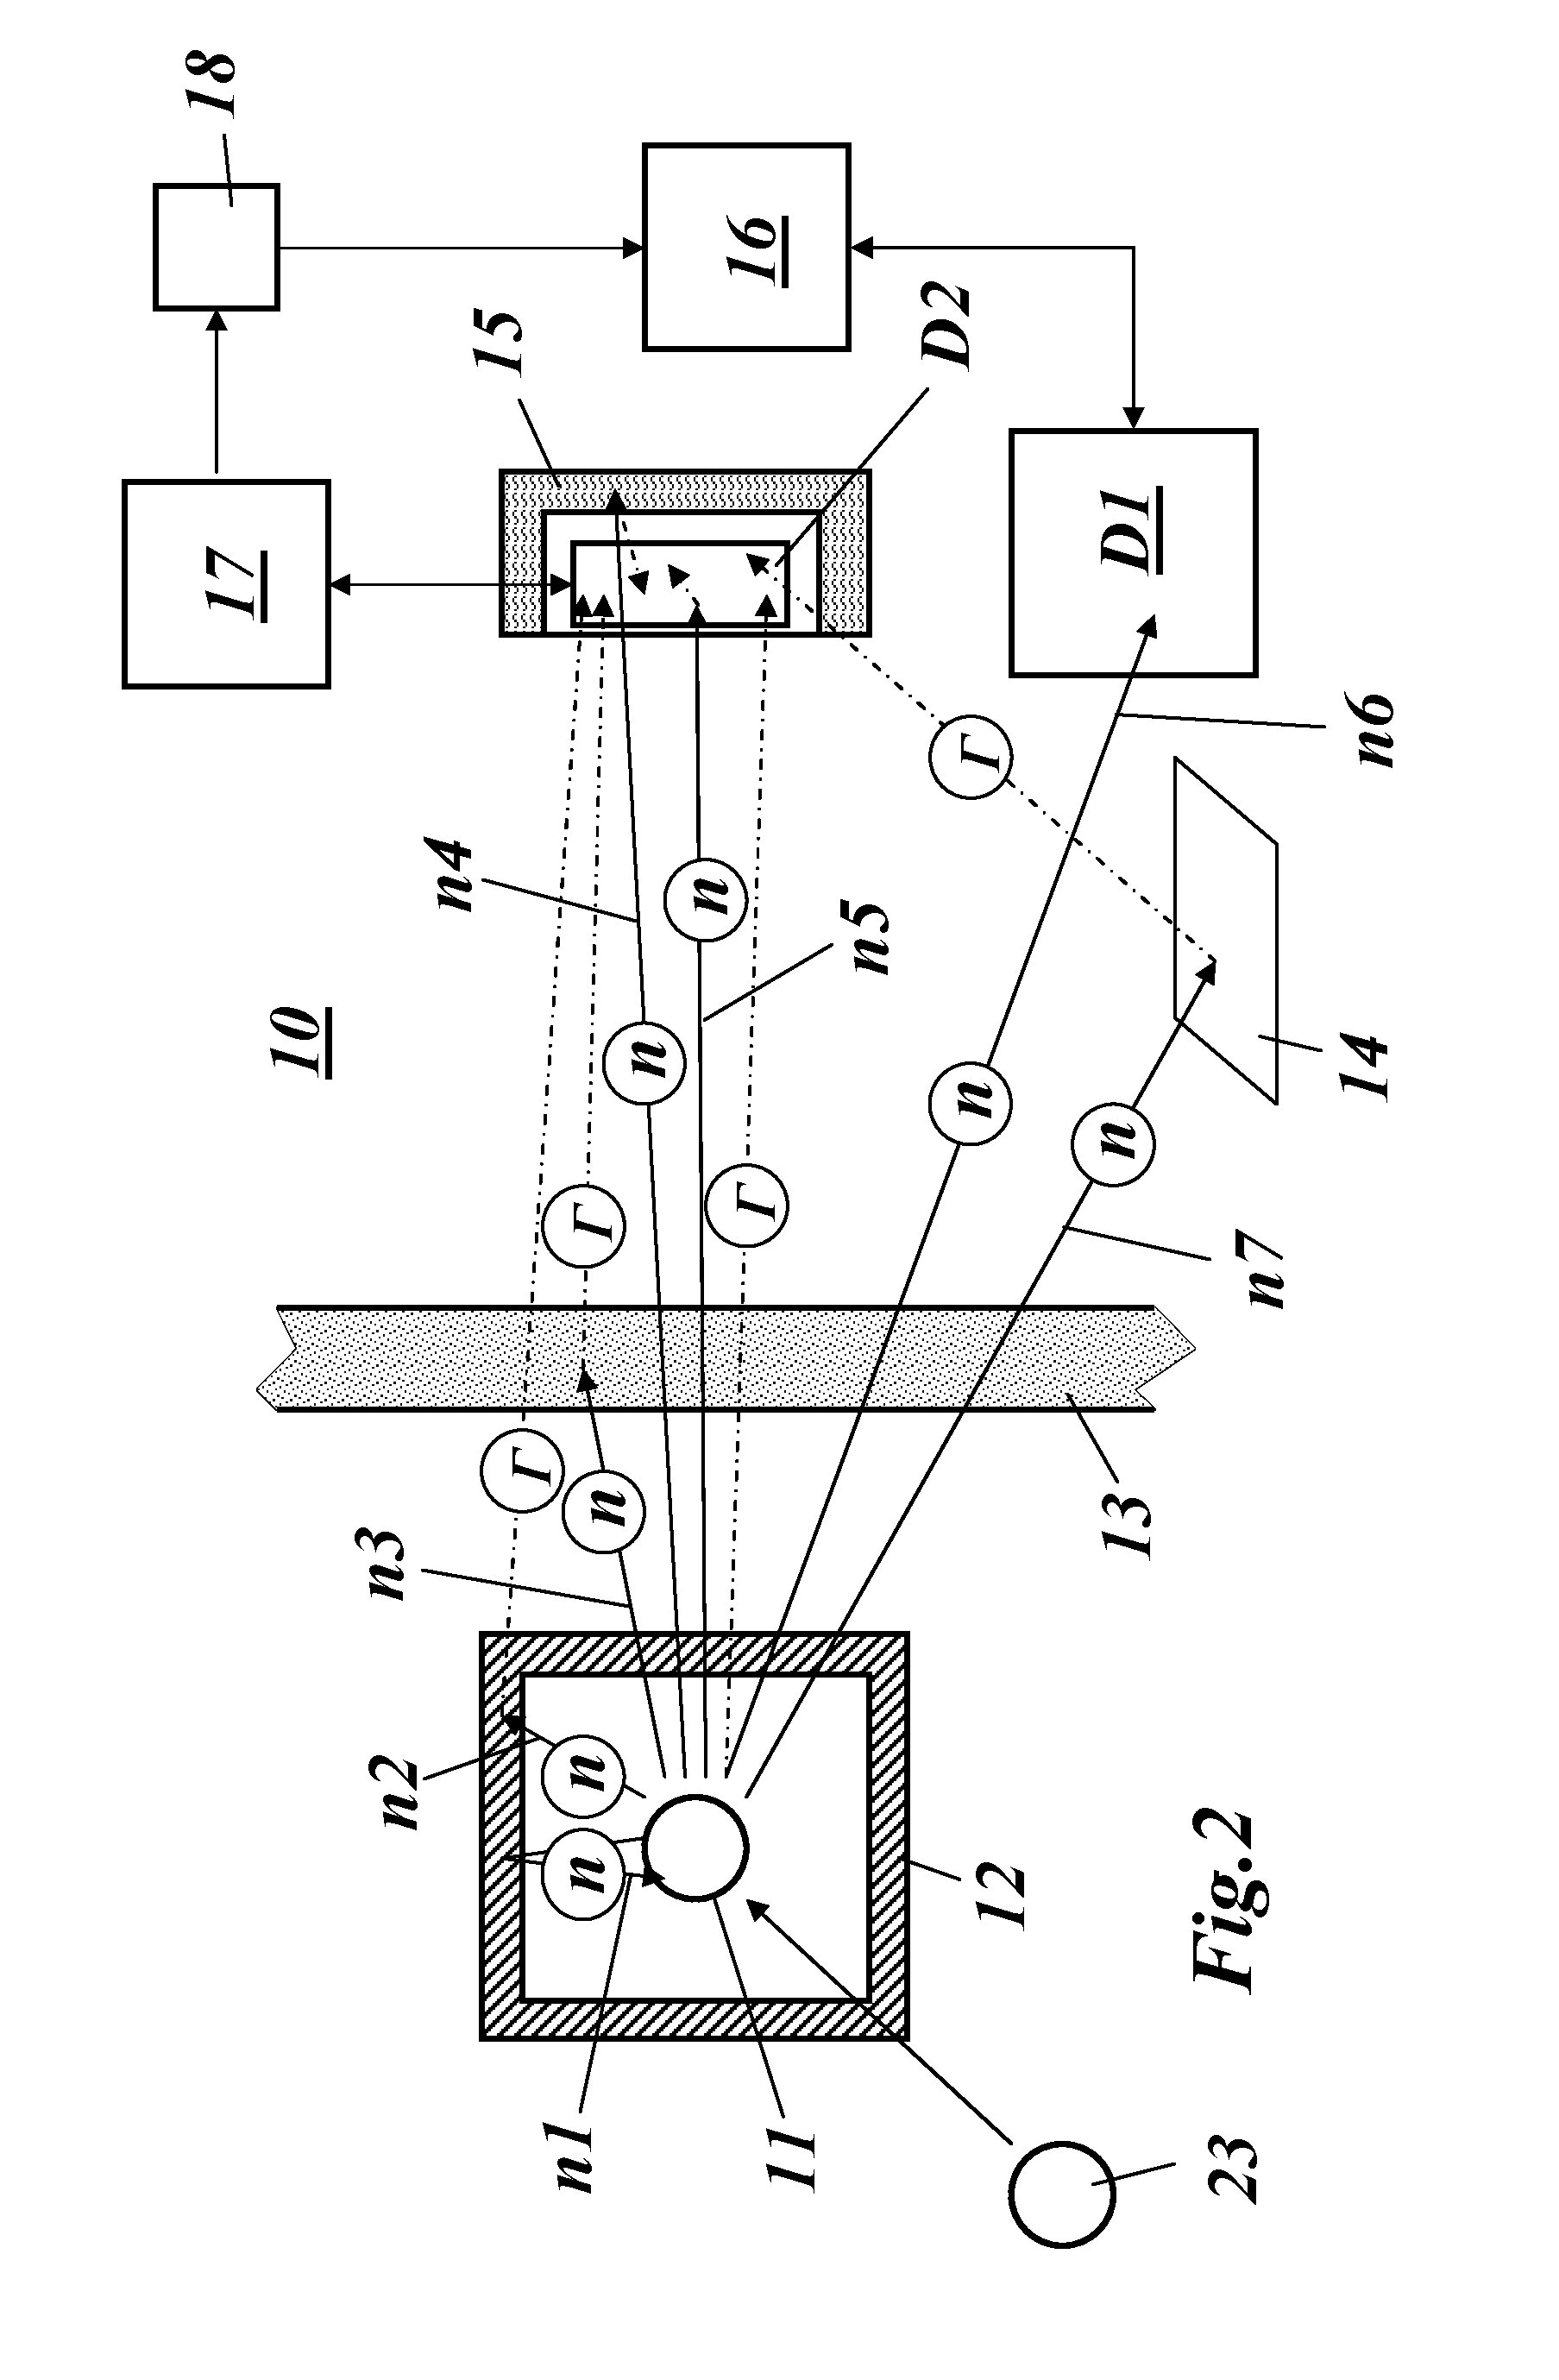 Method for Obtaining Information Signatures from Nuclear Material or About the Presence, the Nature and/or the Shielding of a Nuclear Material and Measurement Setup for Performing Such Method